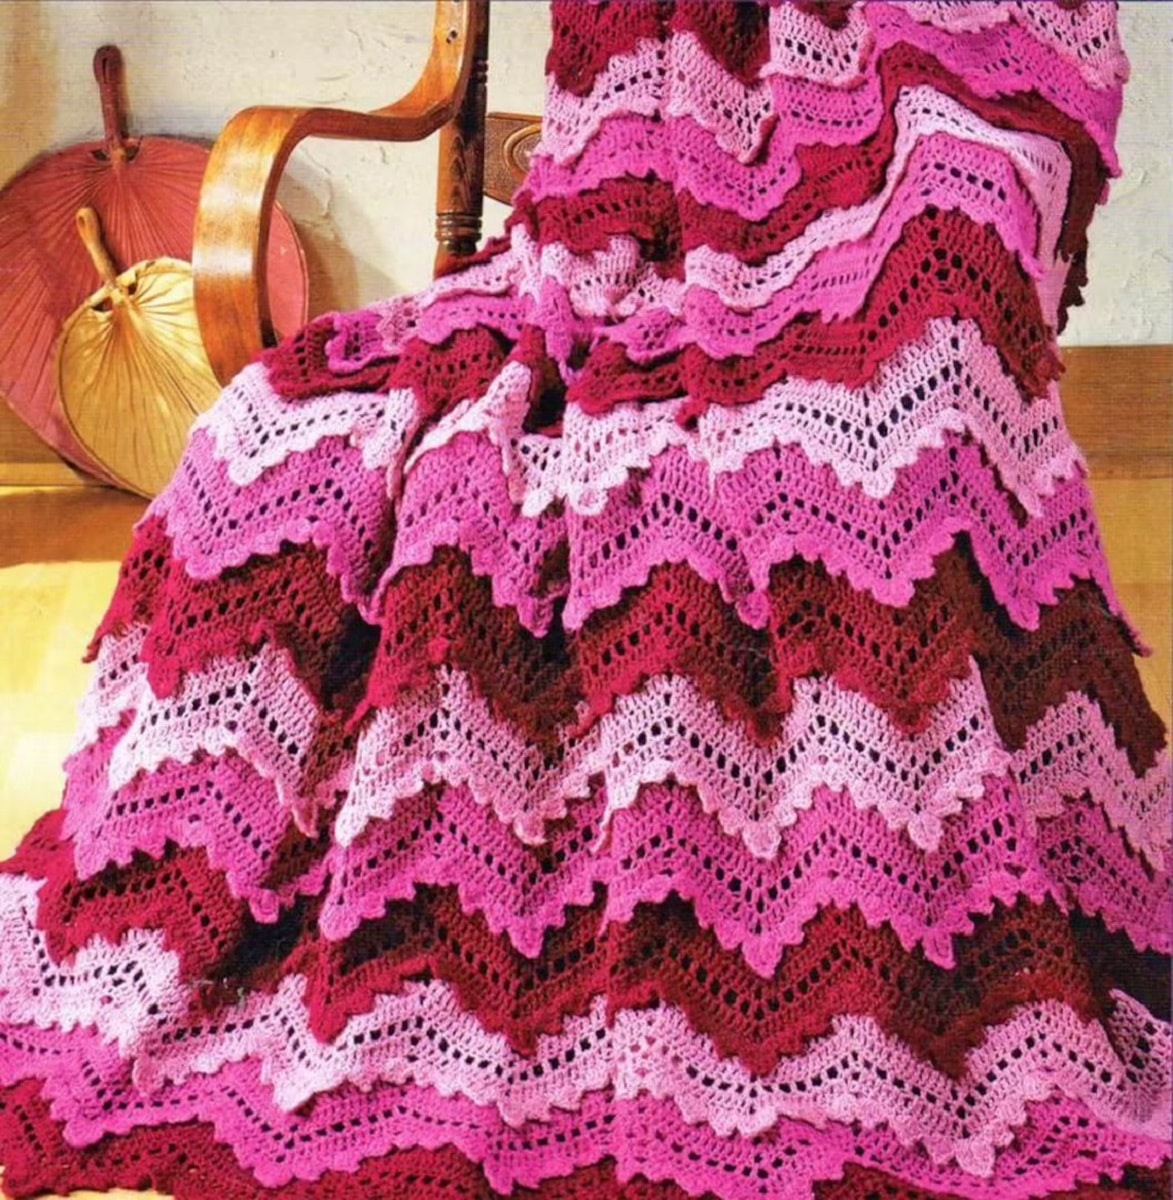 Large pale pink, pink, and purple zig zag crochet blanket draped over a wooden rocking chair.